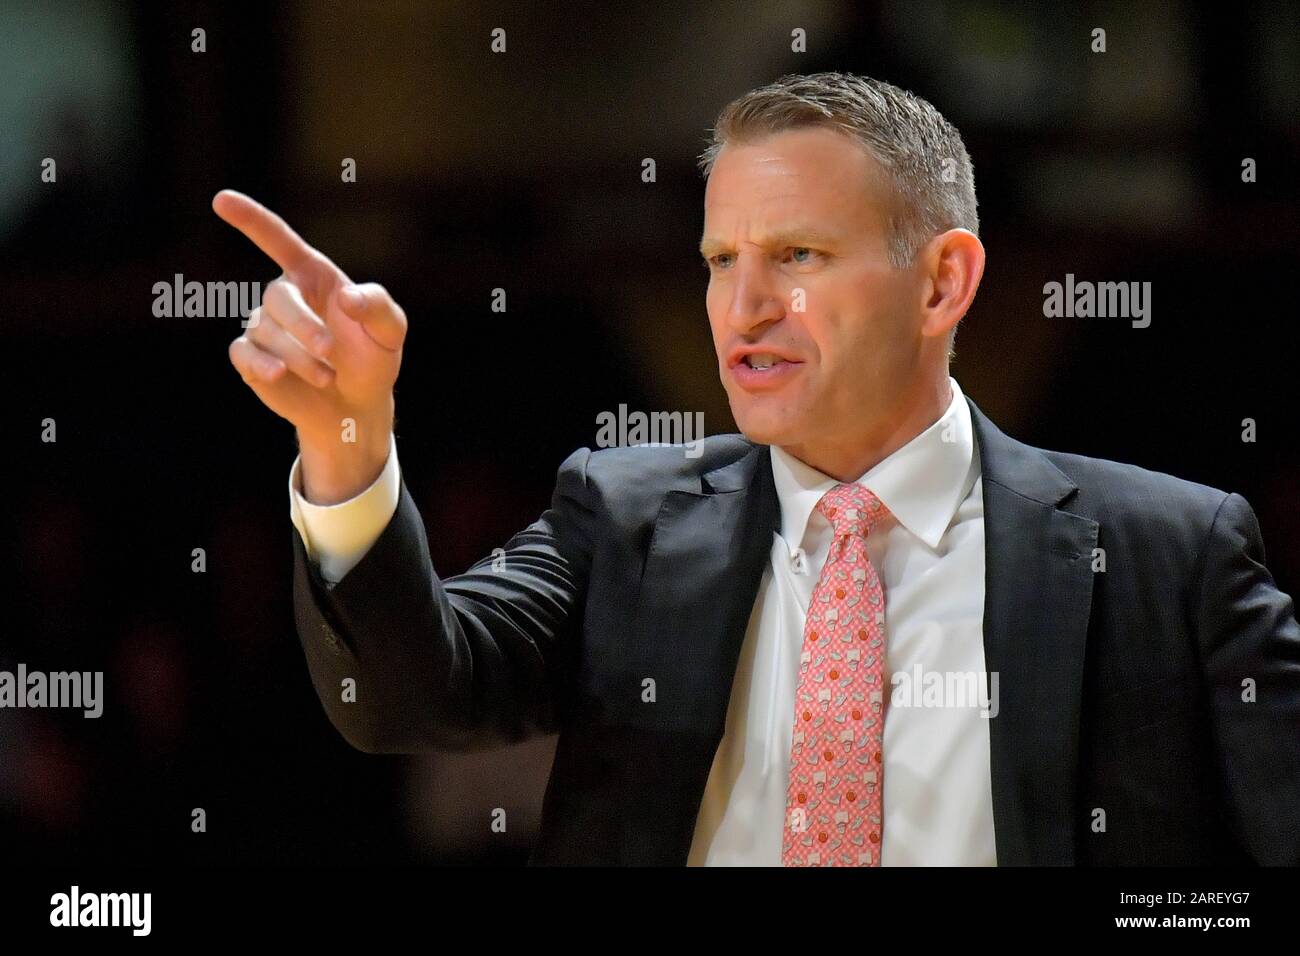 Alabama Crimson Tide head coach Nate Oats during the second half against the Vanderbilt Commodores of an NCAA SEC basketball game at Memorial Gym. Alabama won 77-62. Wednesday, Jan 22, 2020, in Nashville. Alabama defeated Vanderbilt 77-62. (Photo by IOS/ESPA-Images) Stock Photo